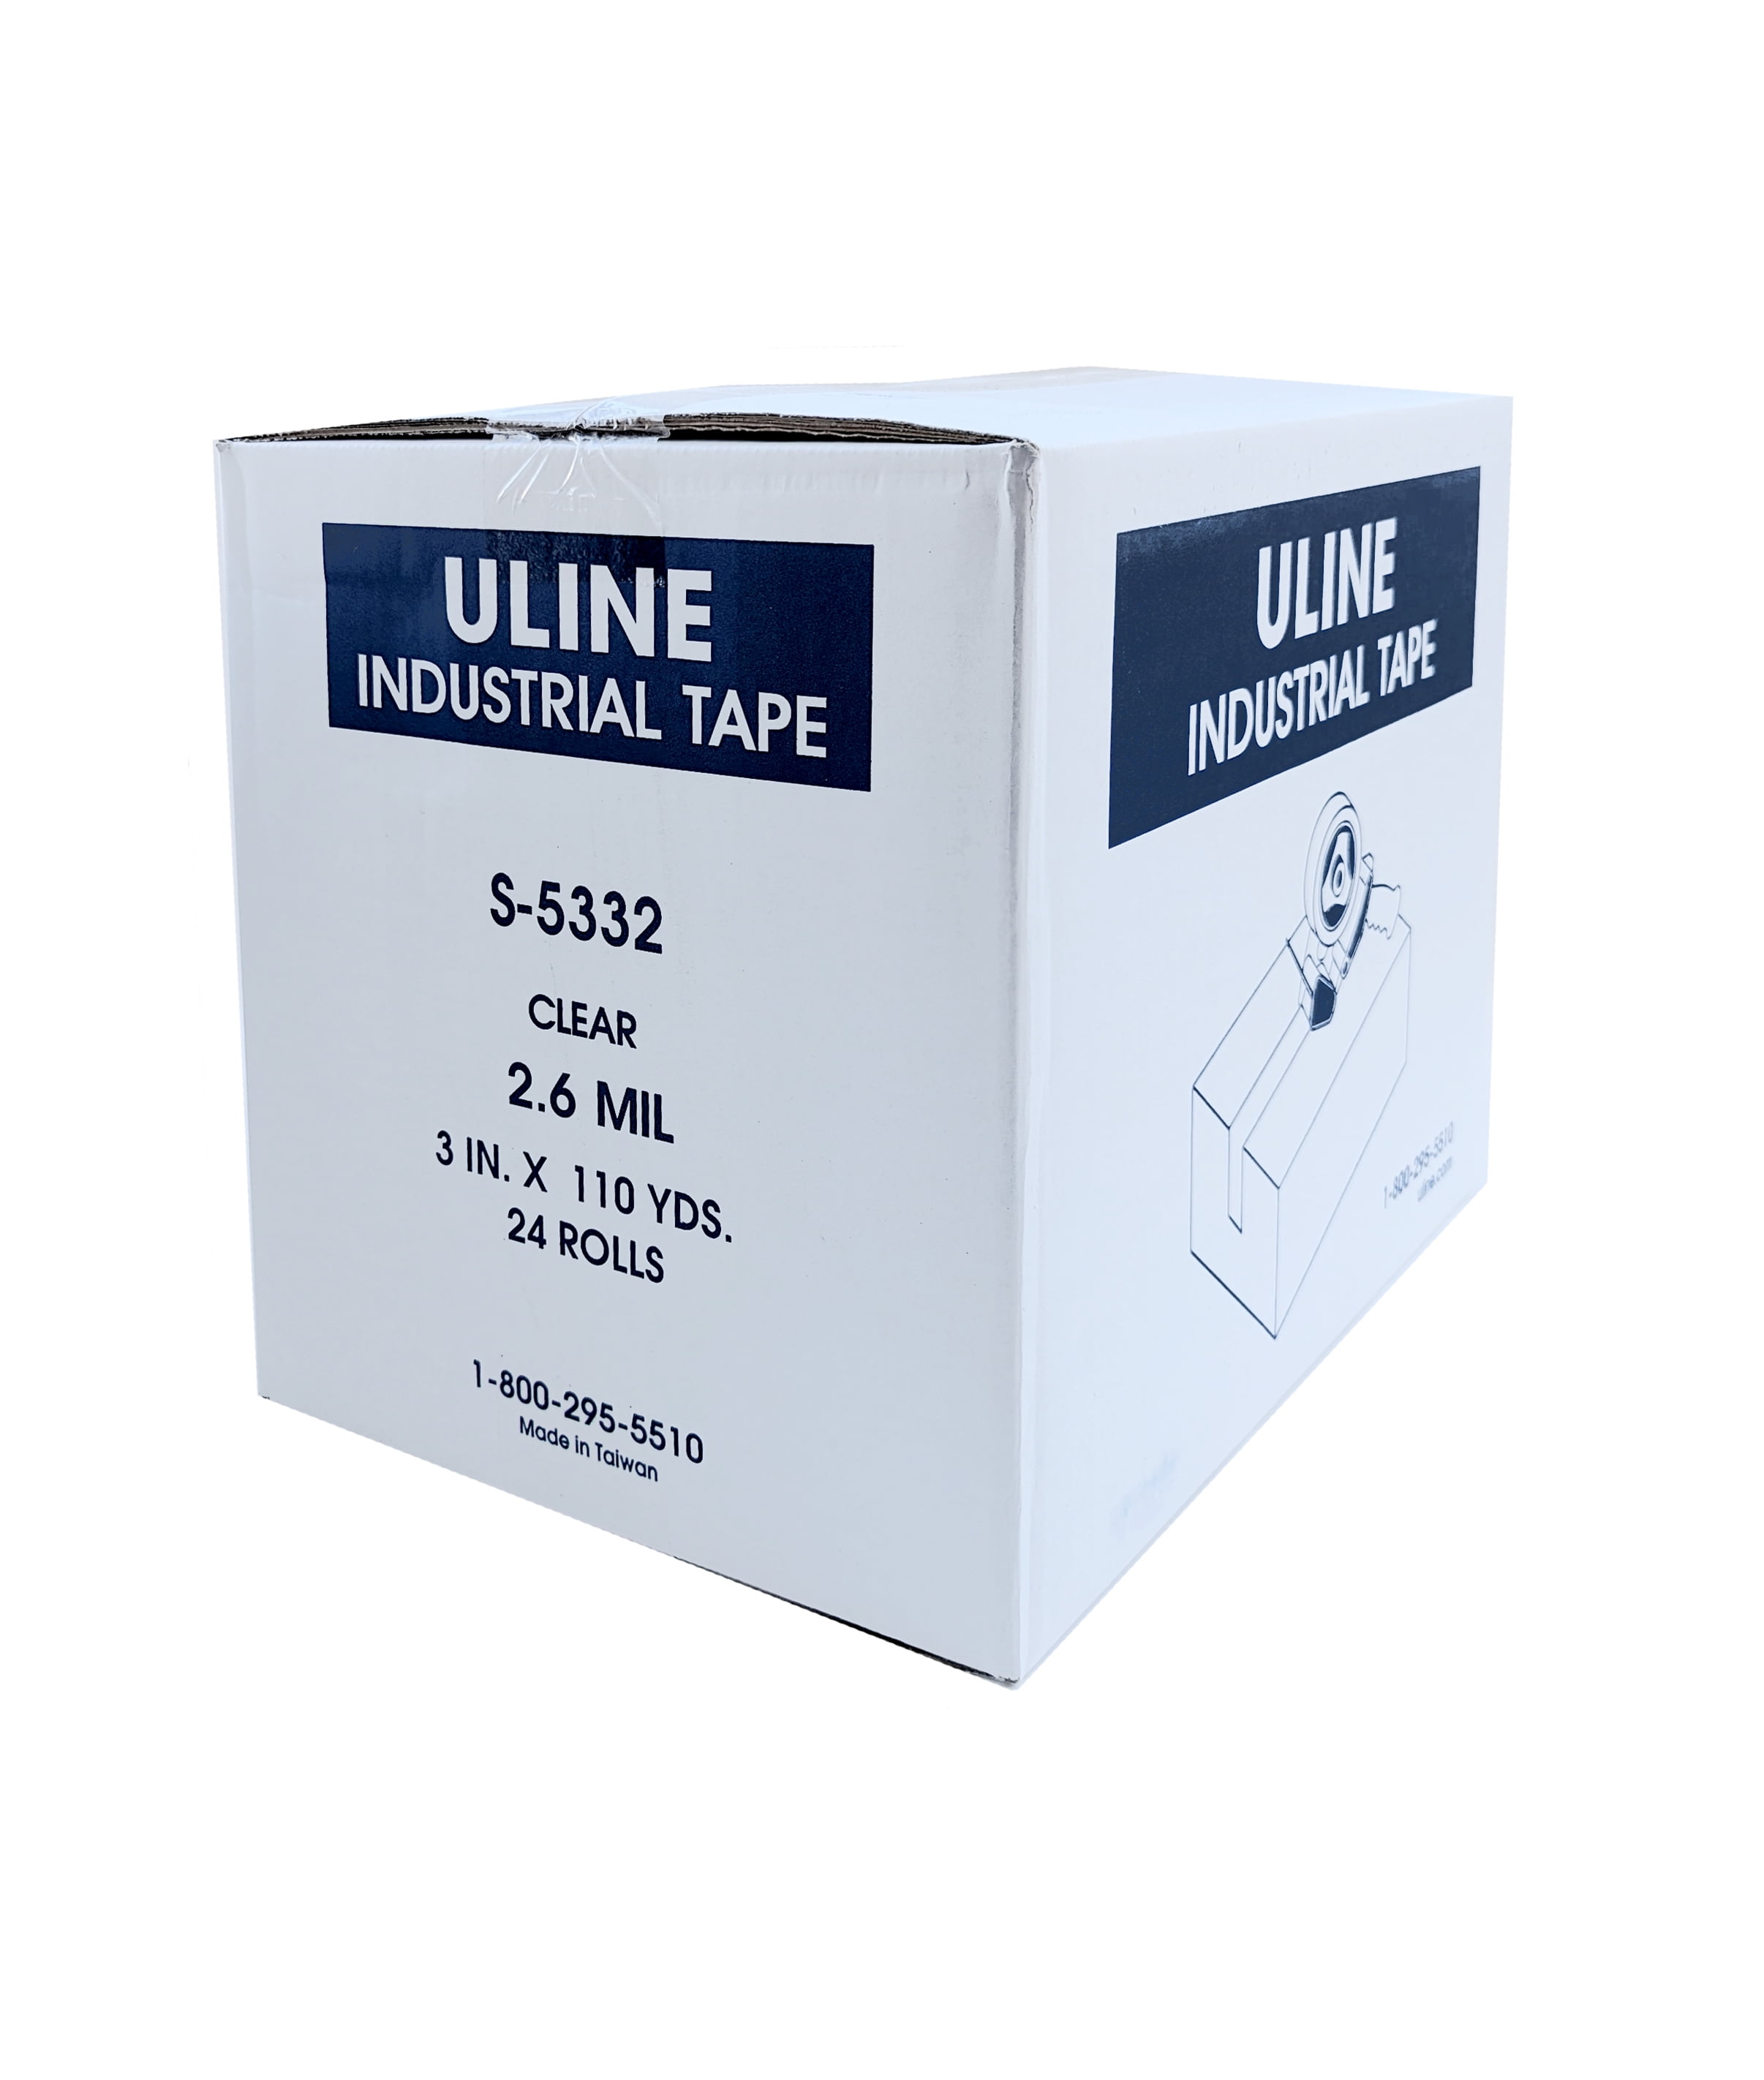 Packing Supplies, Packing Materials in Stock - Uline